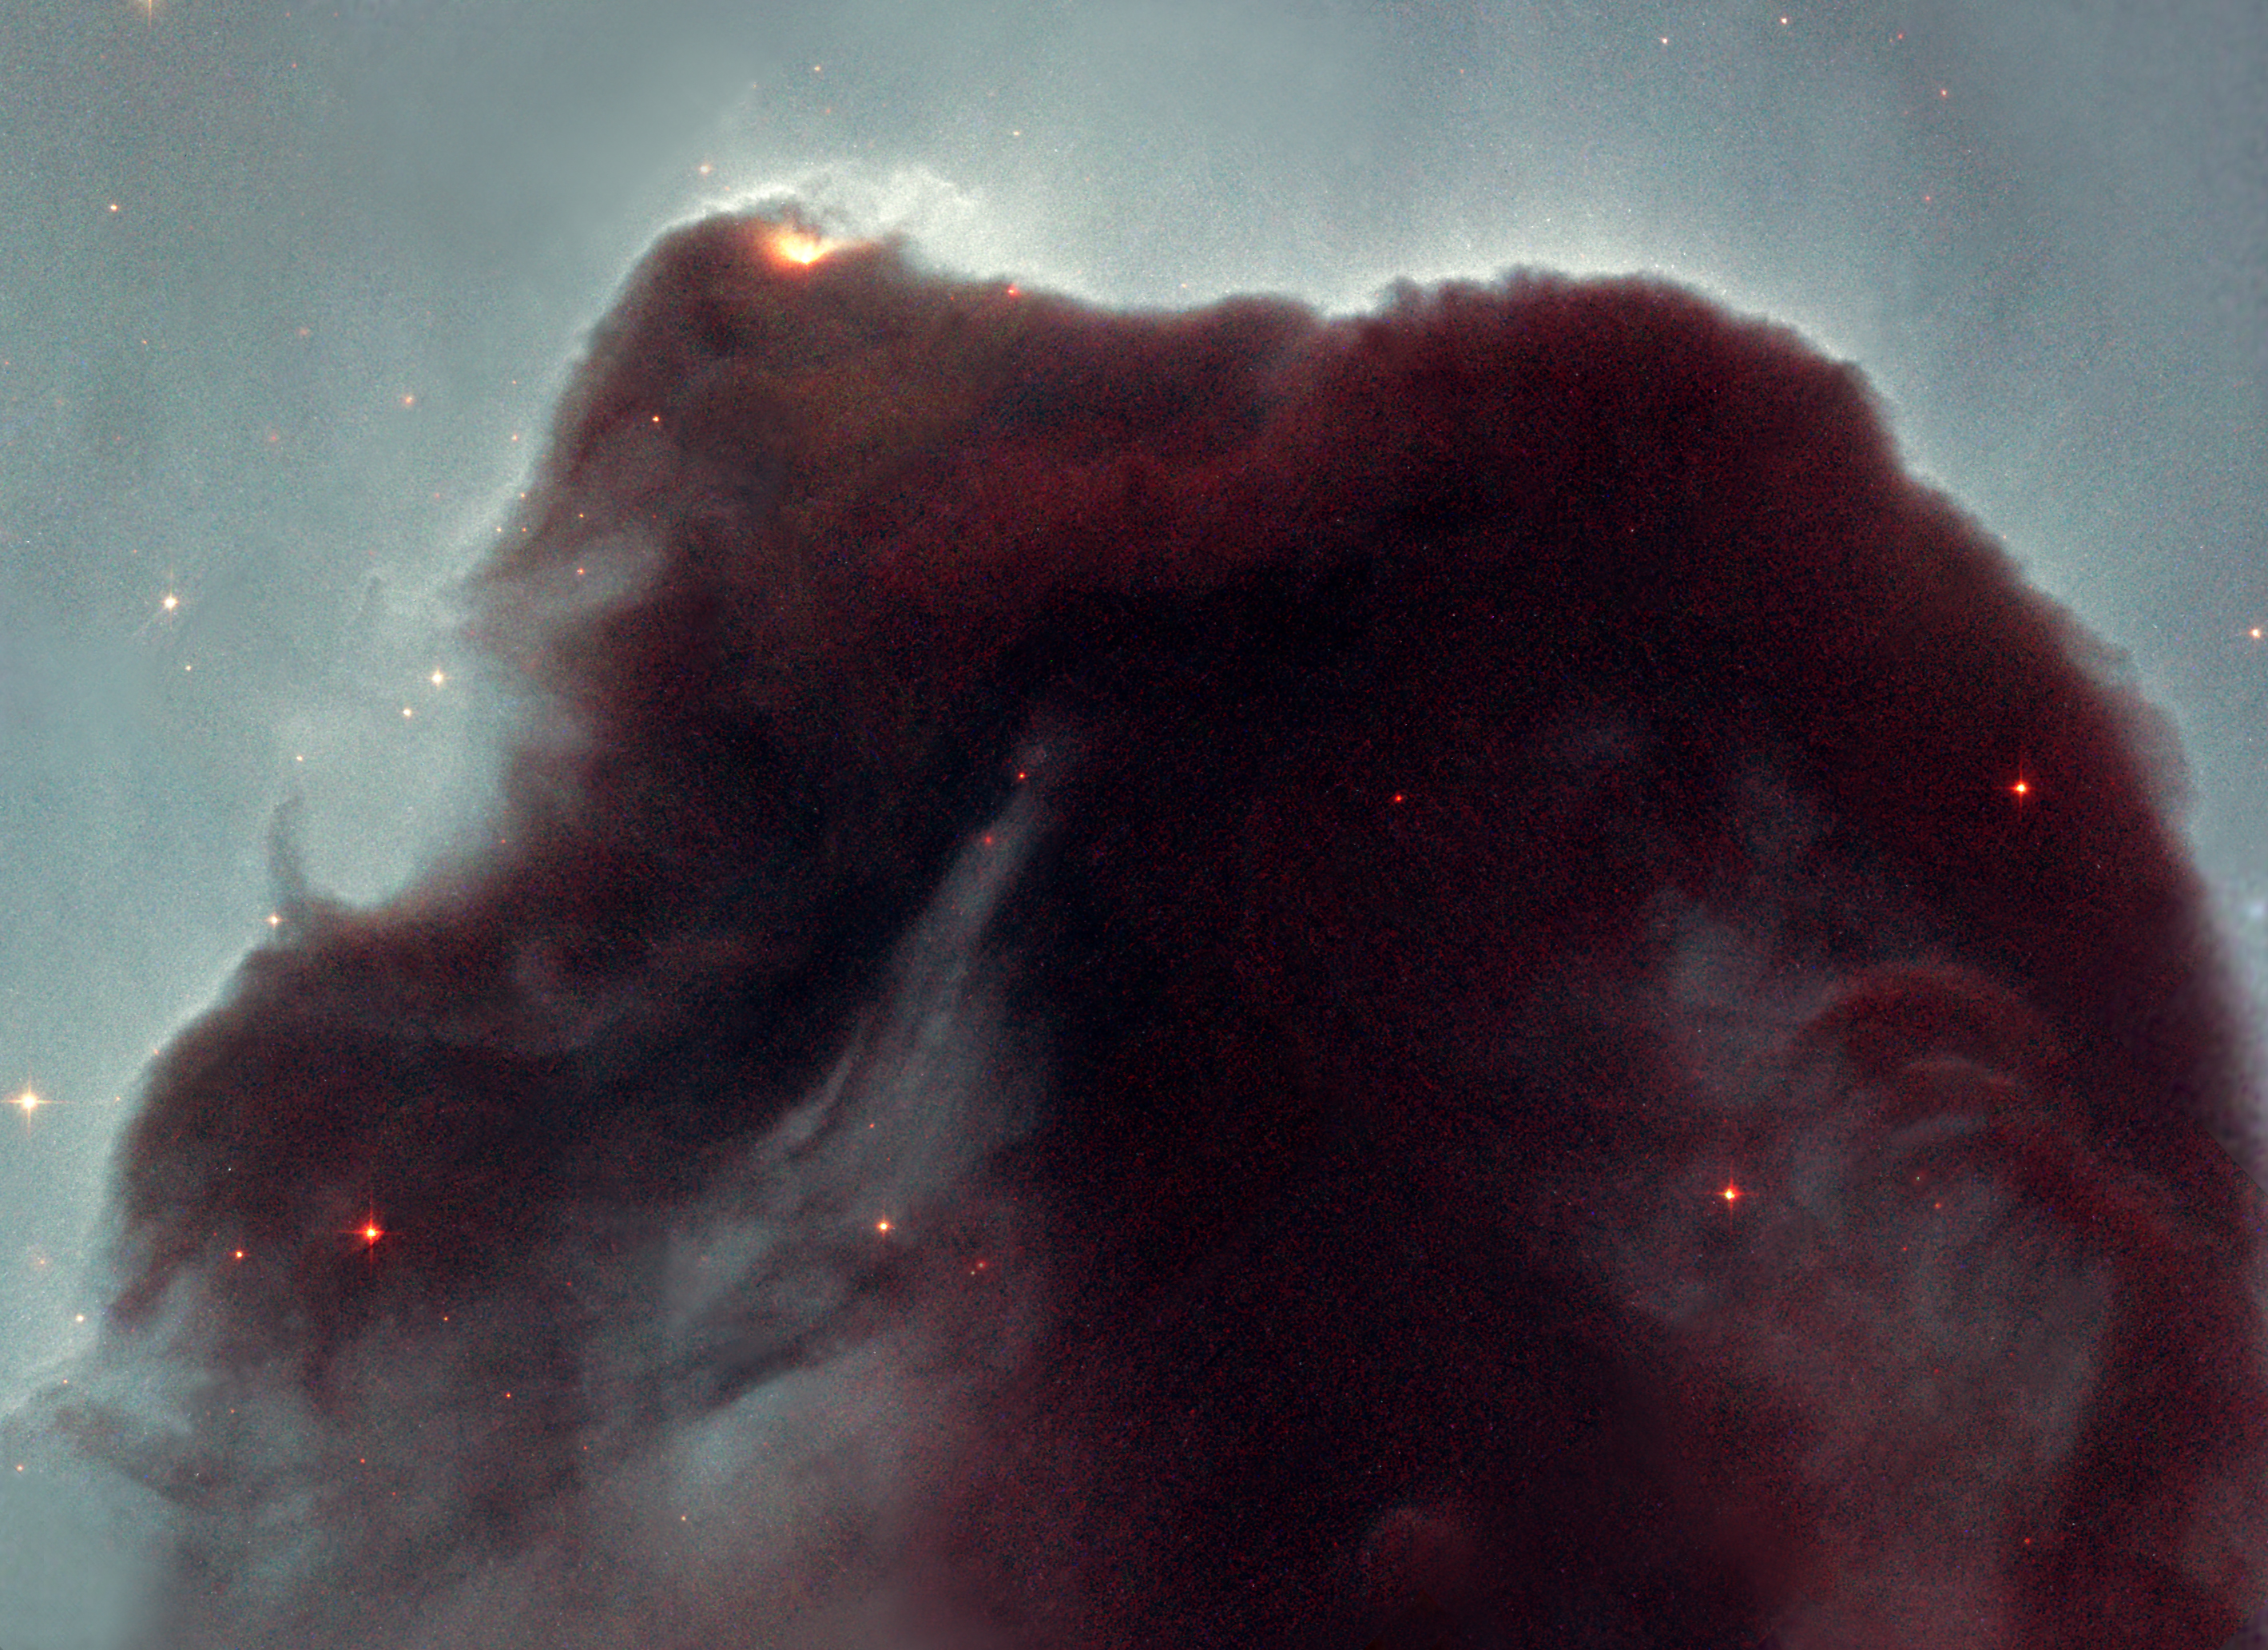 A detailed image of the Horsehead Nebula, captured by JWST, showing a dense, dark cloud of dust and gas with tiny glowing stars scattered around.